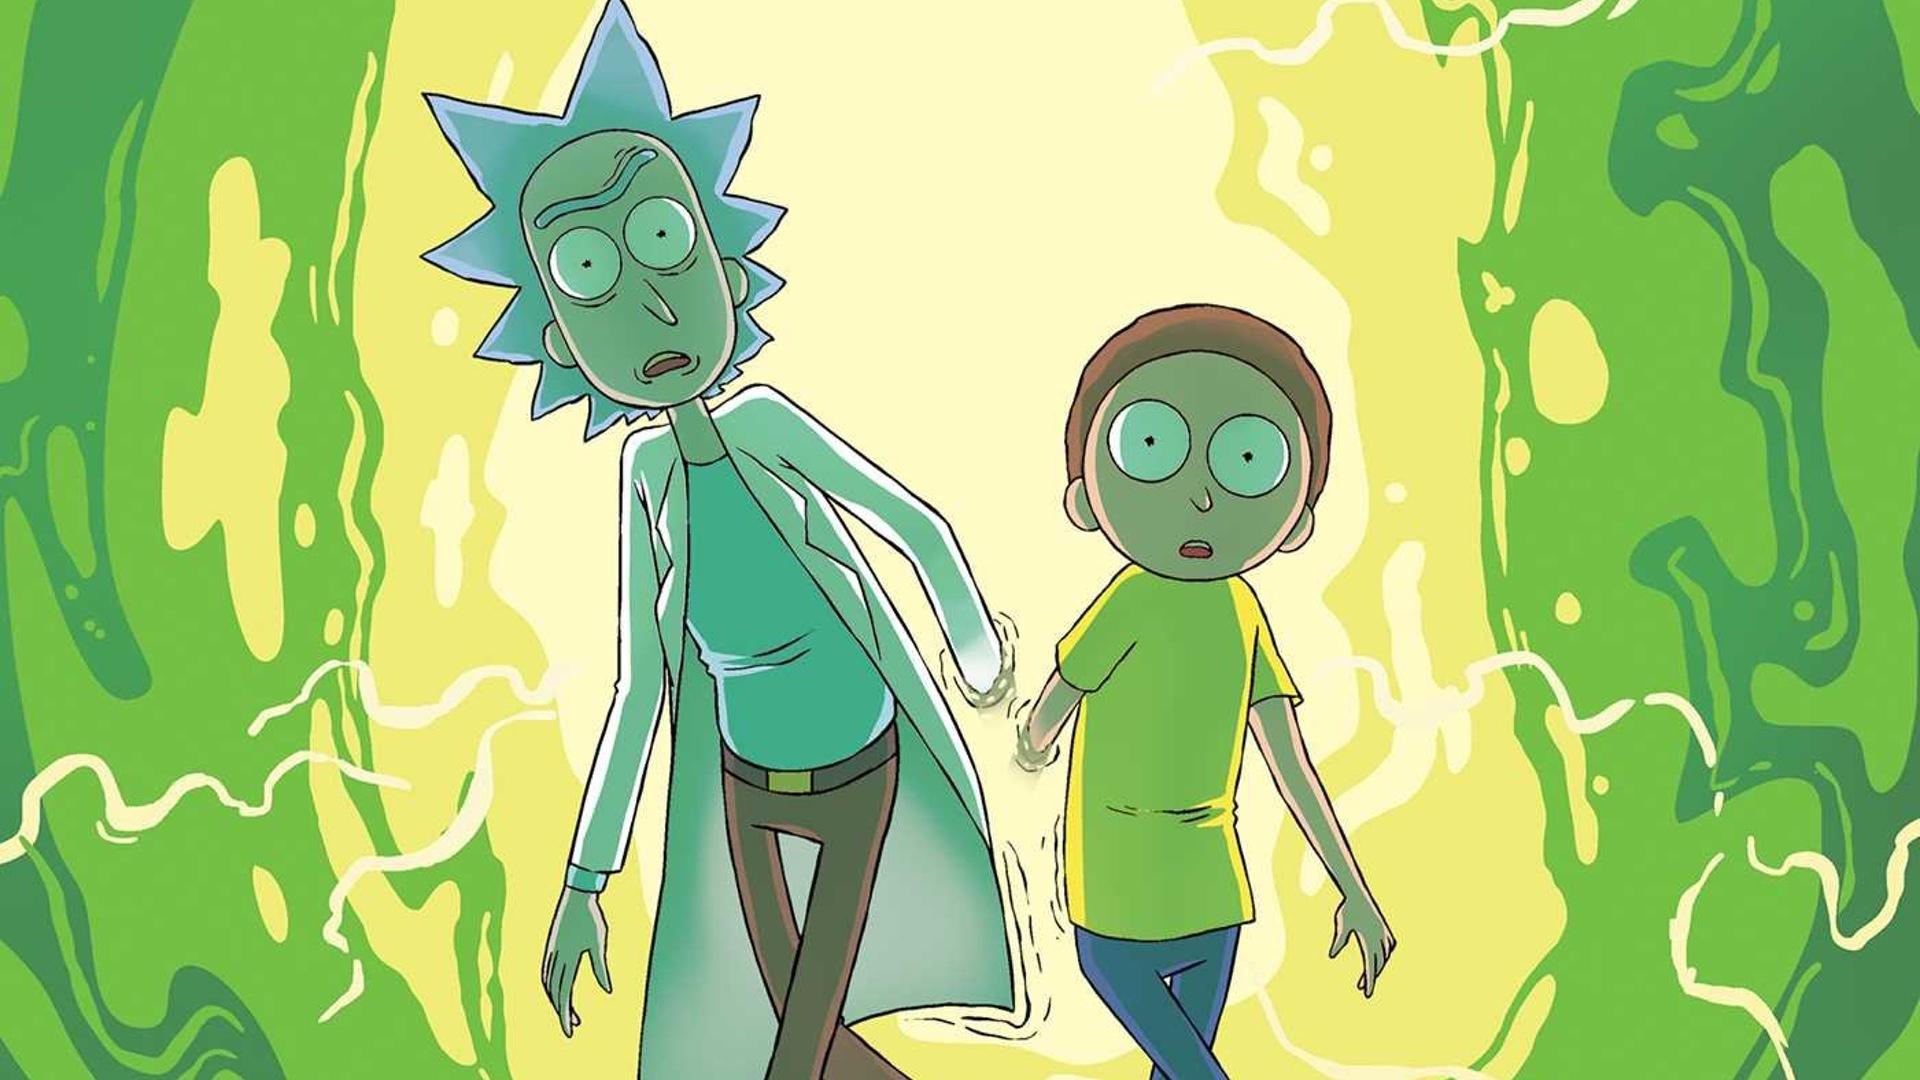 RICK AND MORTY Season 4 Is Set to Premiere Later This Year